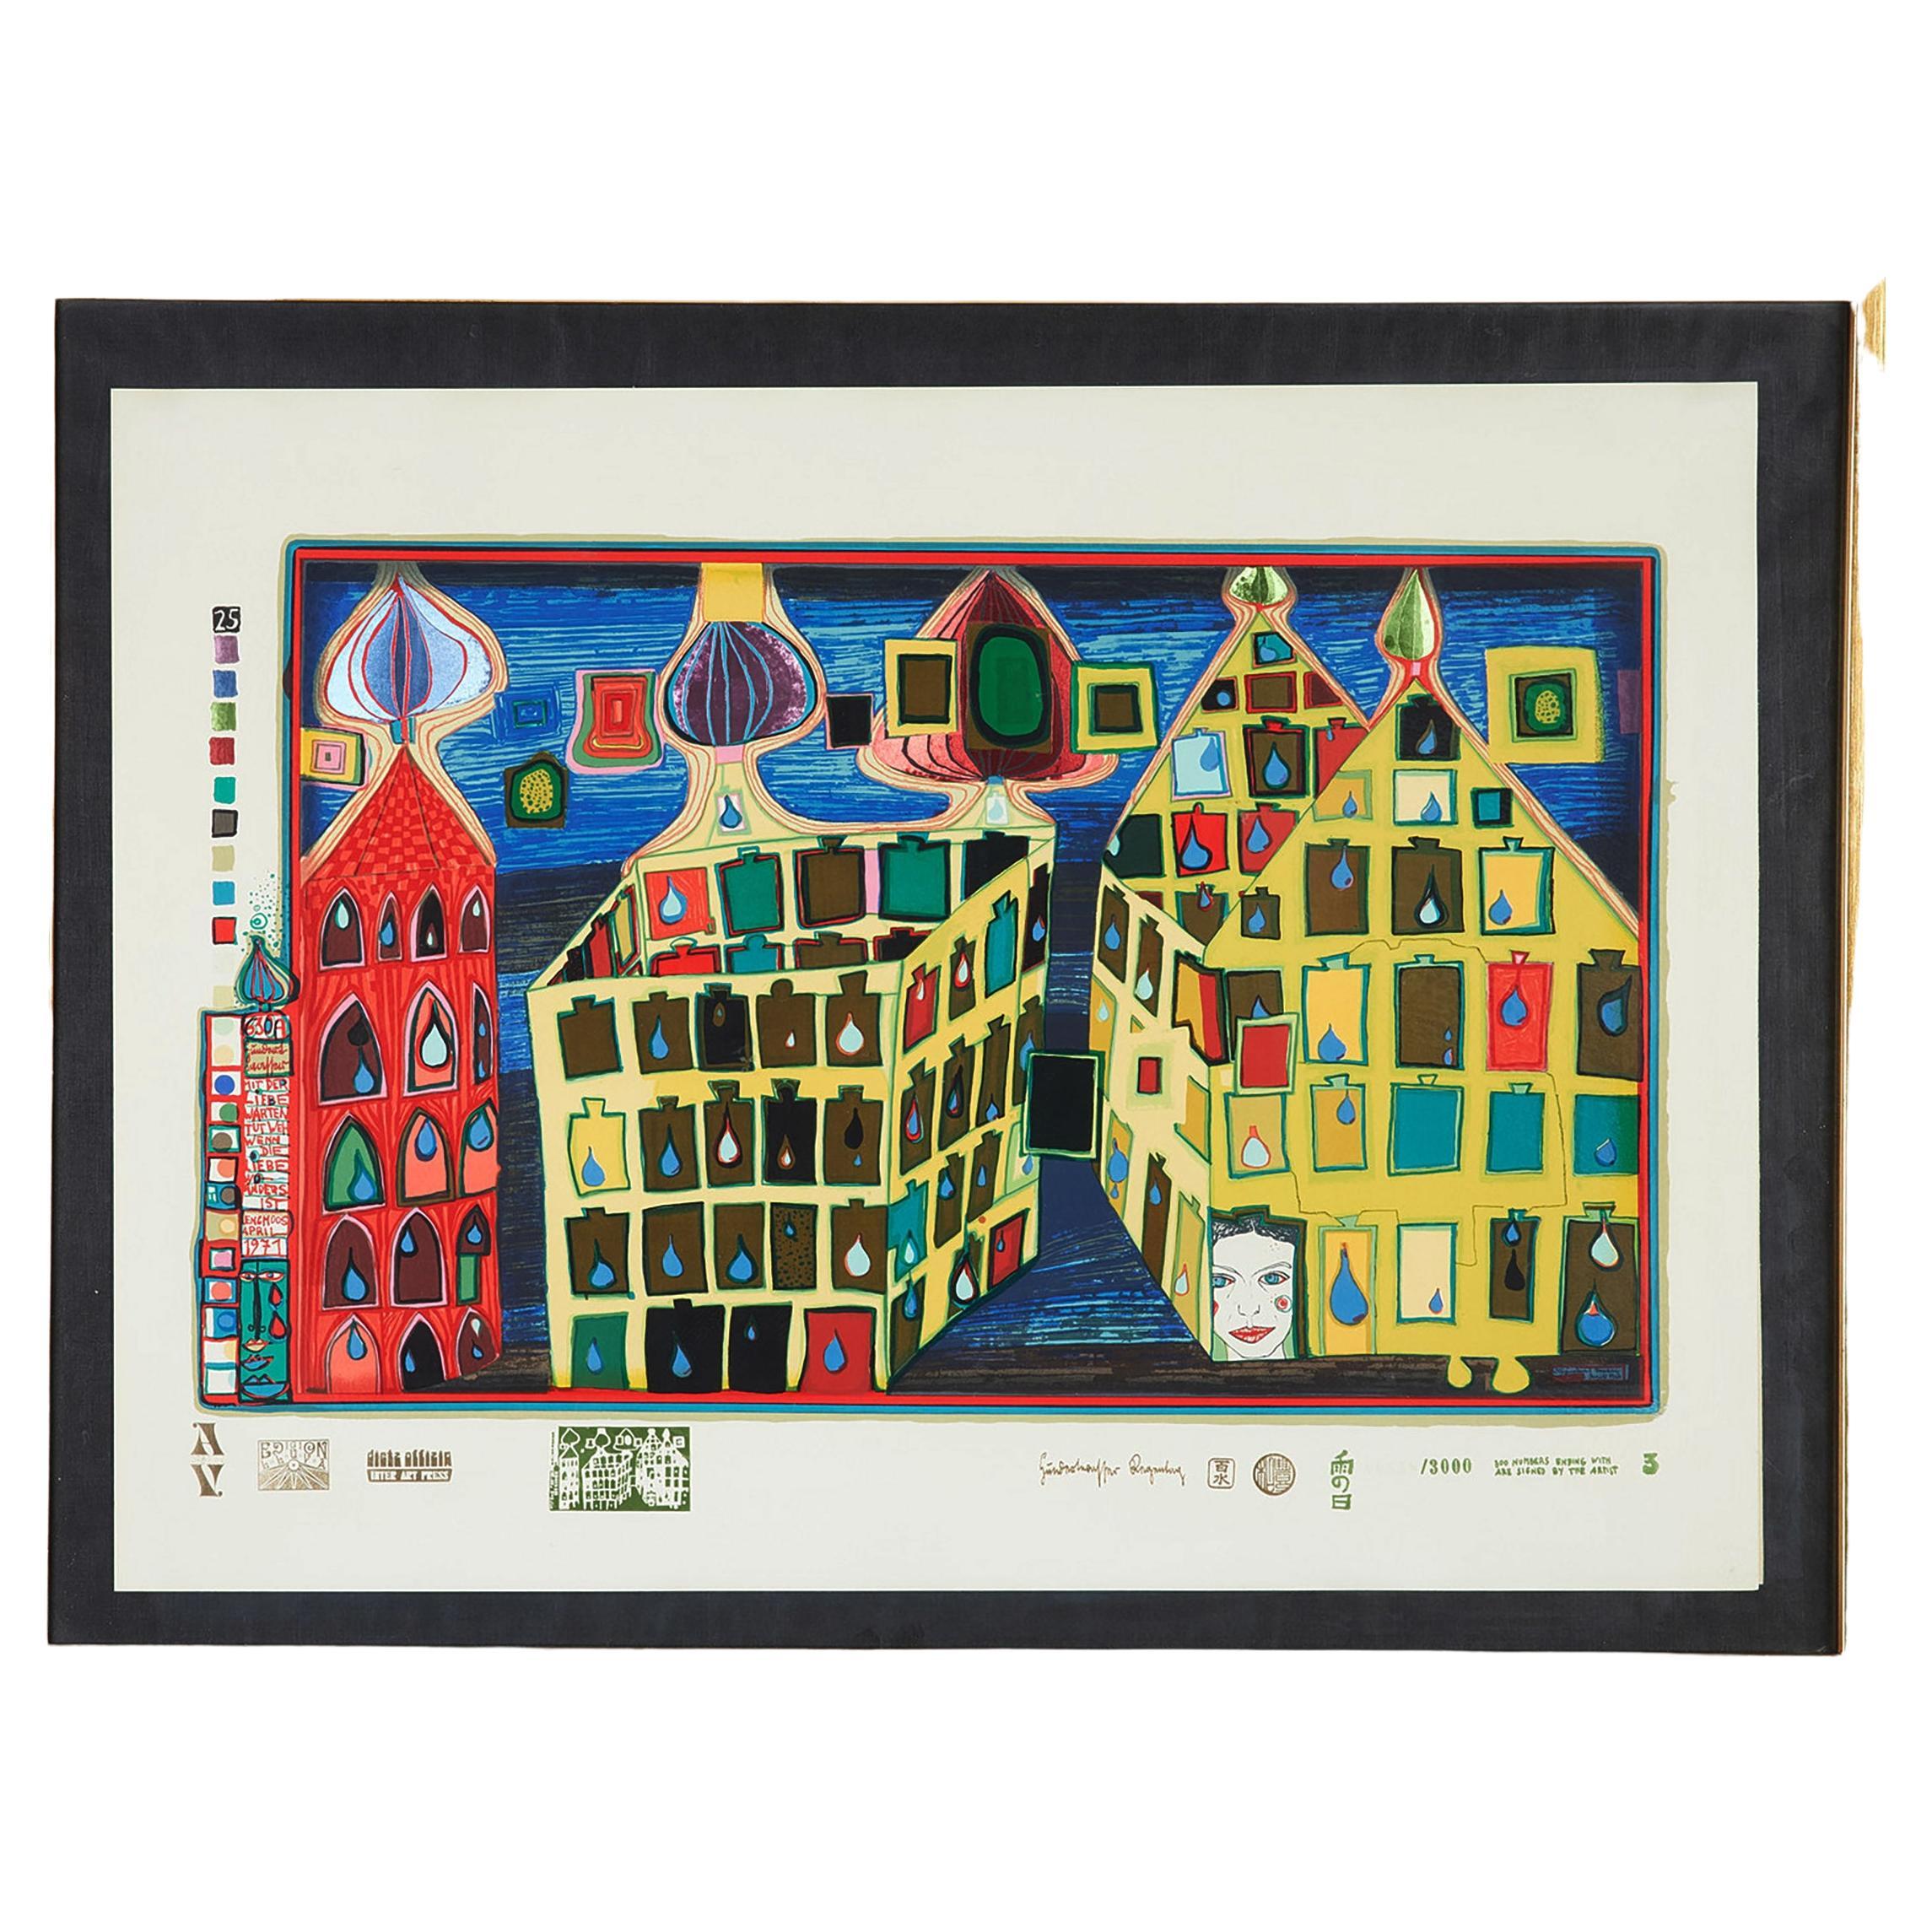 Friedensreich Hundertwasser “It hurts to wait with love in somewhere else” For Sale